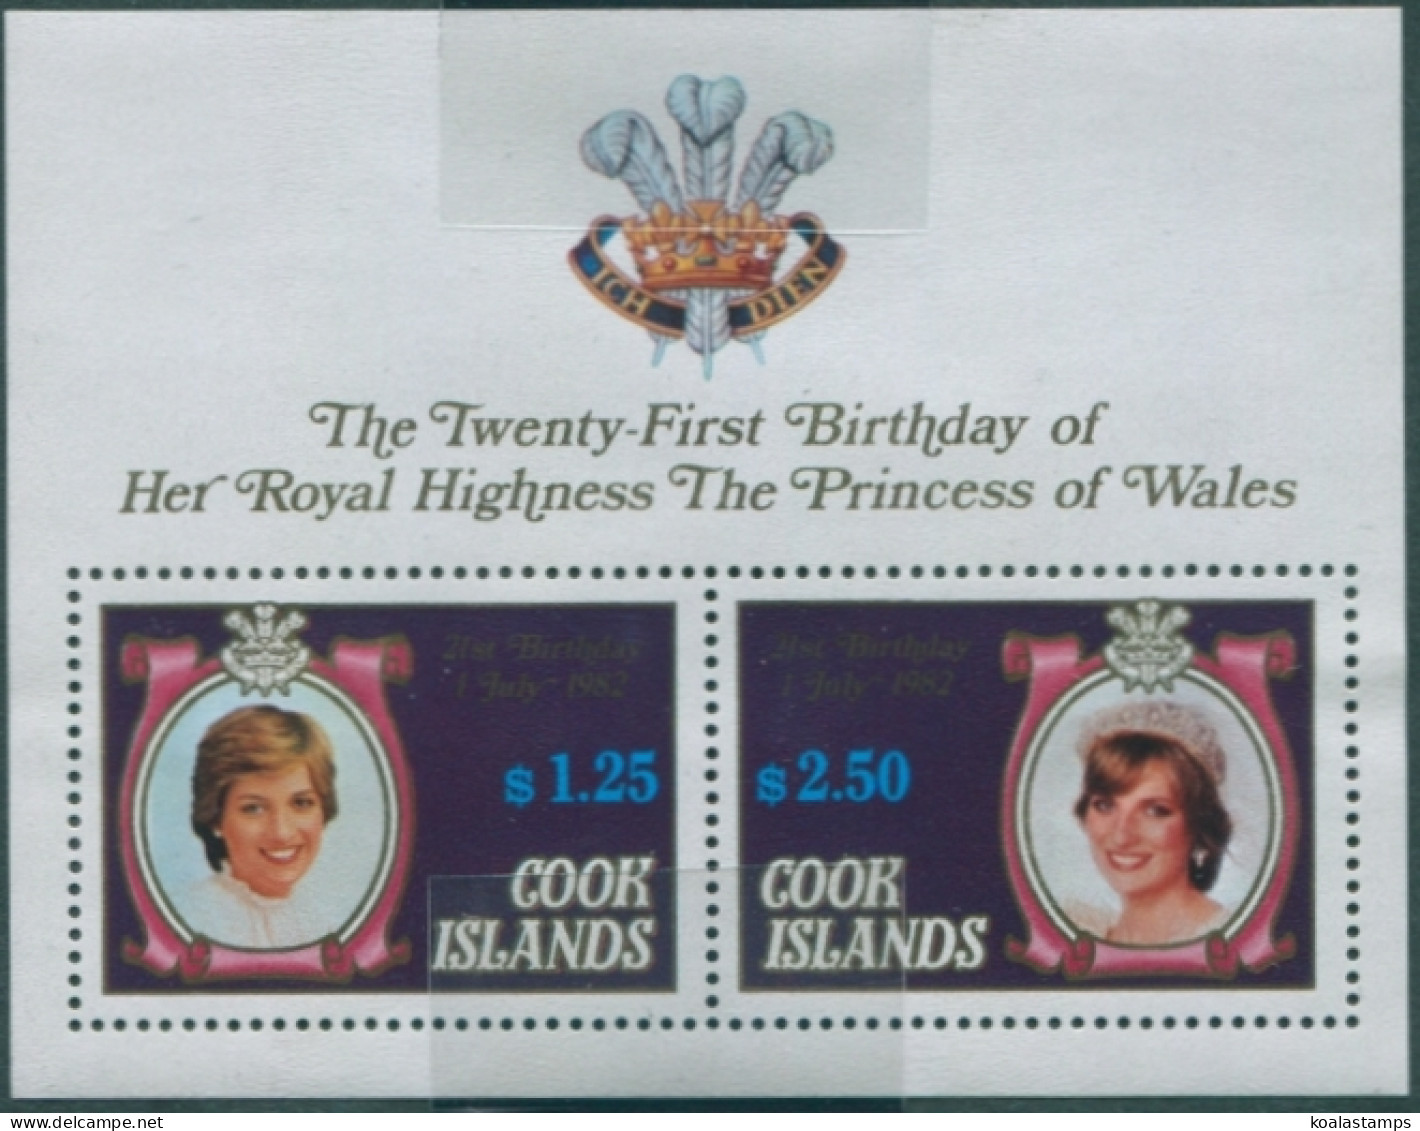 Cook Islands 1982 SG837 Princess Of Wales Birthday MS MNH - Cook